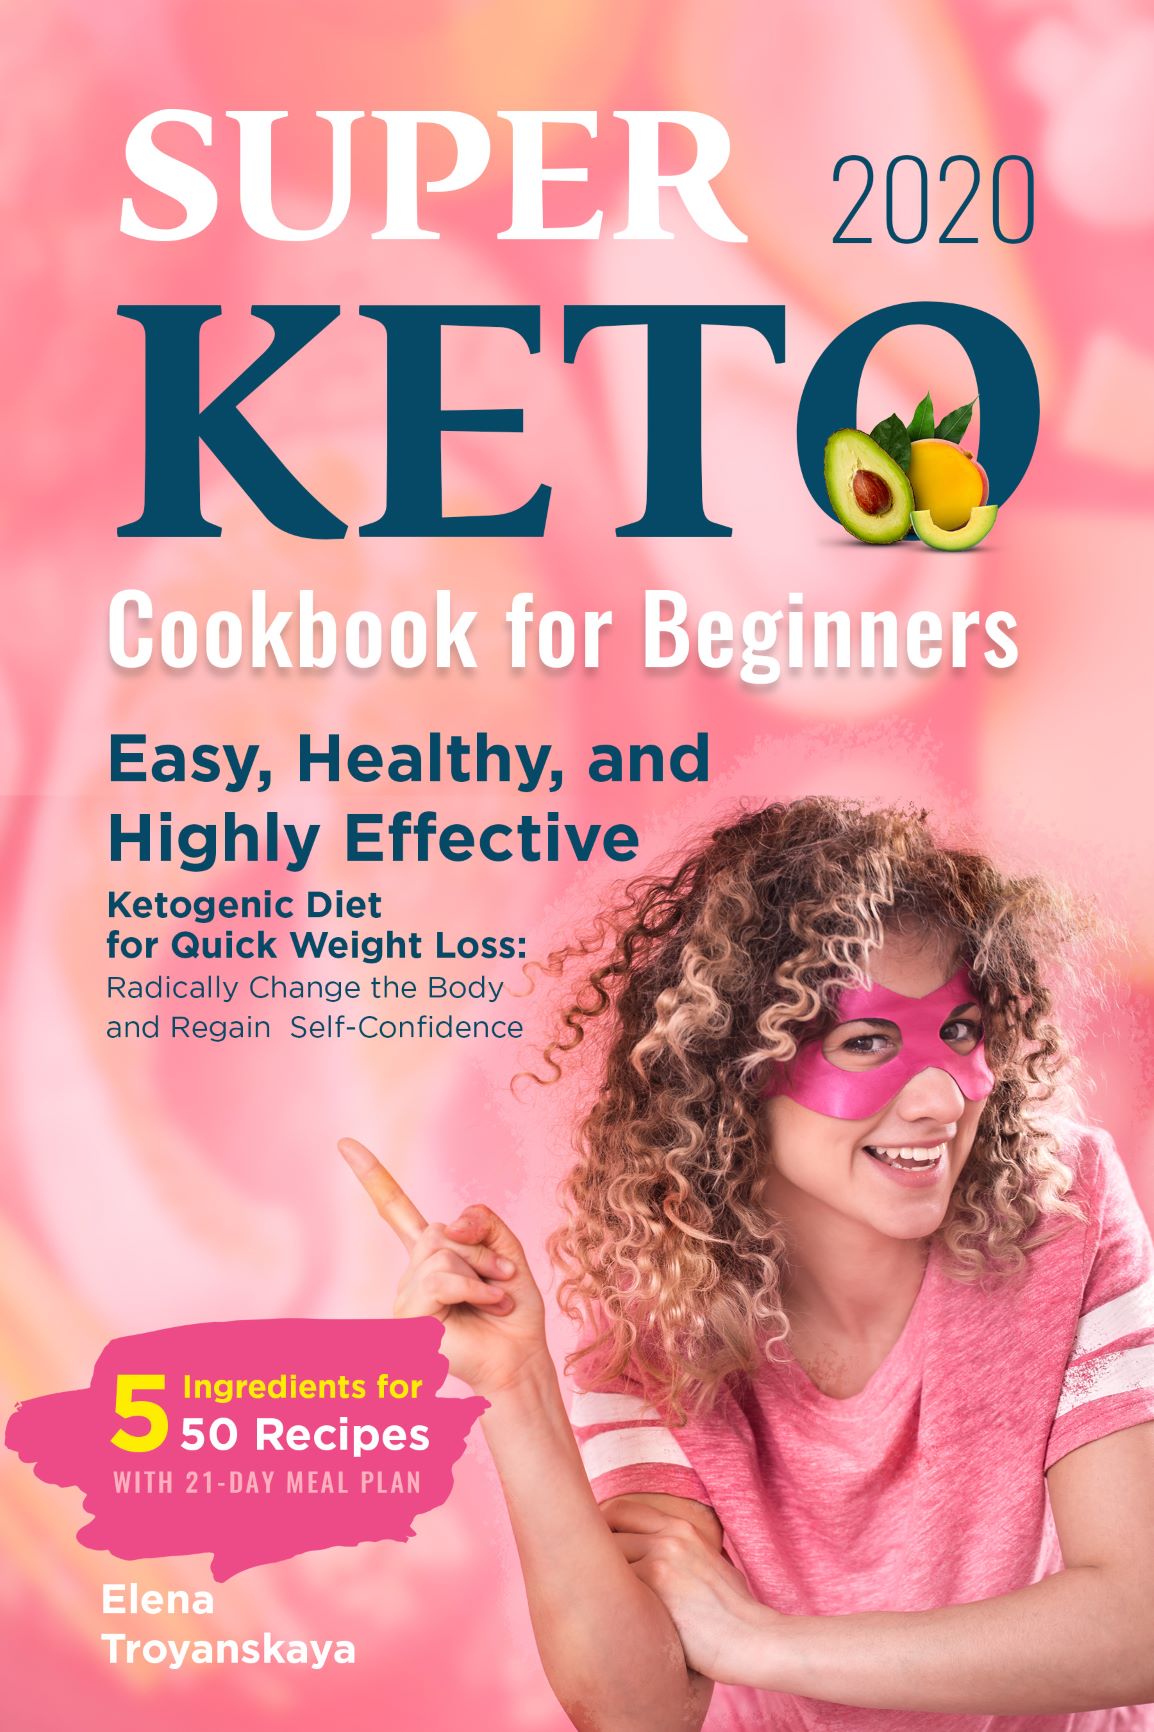 FREE: Super Keto Cookbook for Beginners 2020: Easy, Healthy, and Highly Effective Ketogenic Diet for Quick Weight Loss: Radically Change the Body and Regain Self-Confidence (5 Ingredients for 50 Recipes) by Elena Troyanskaya